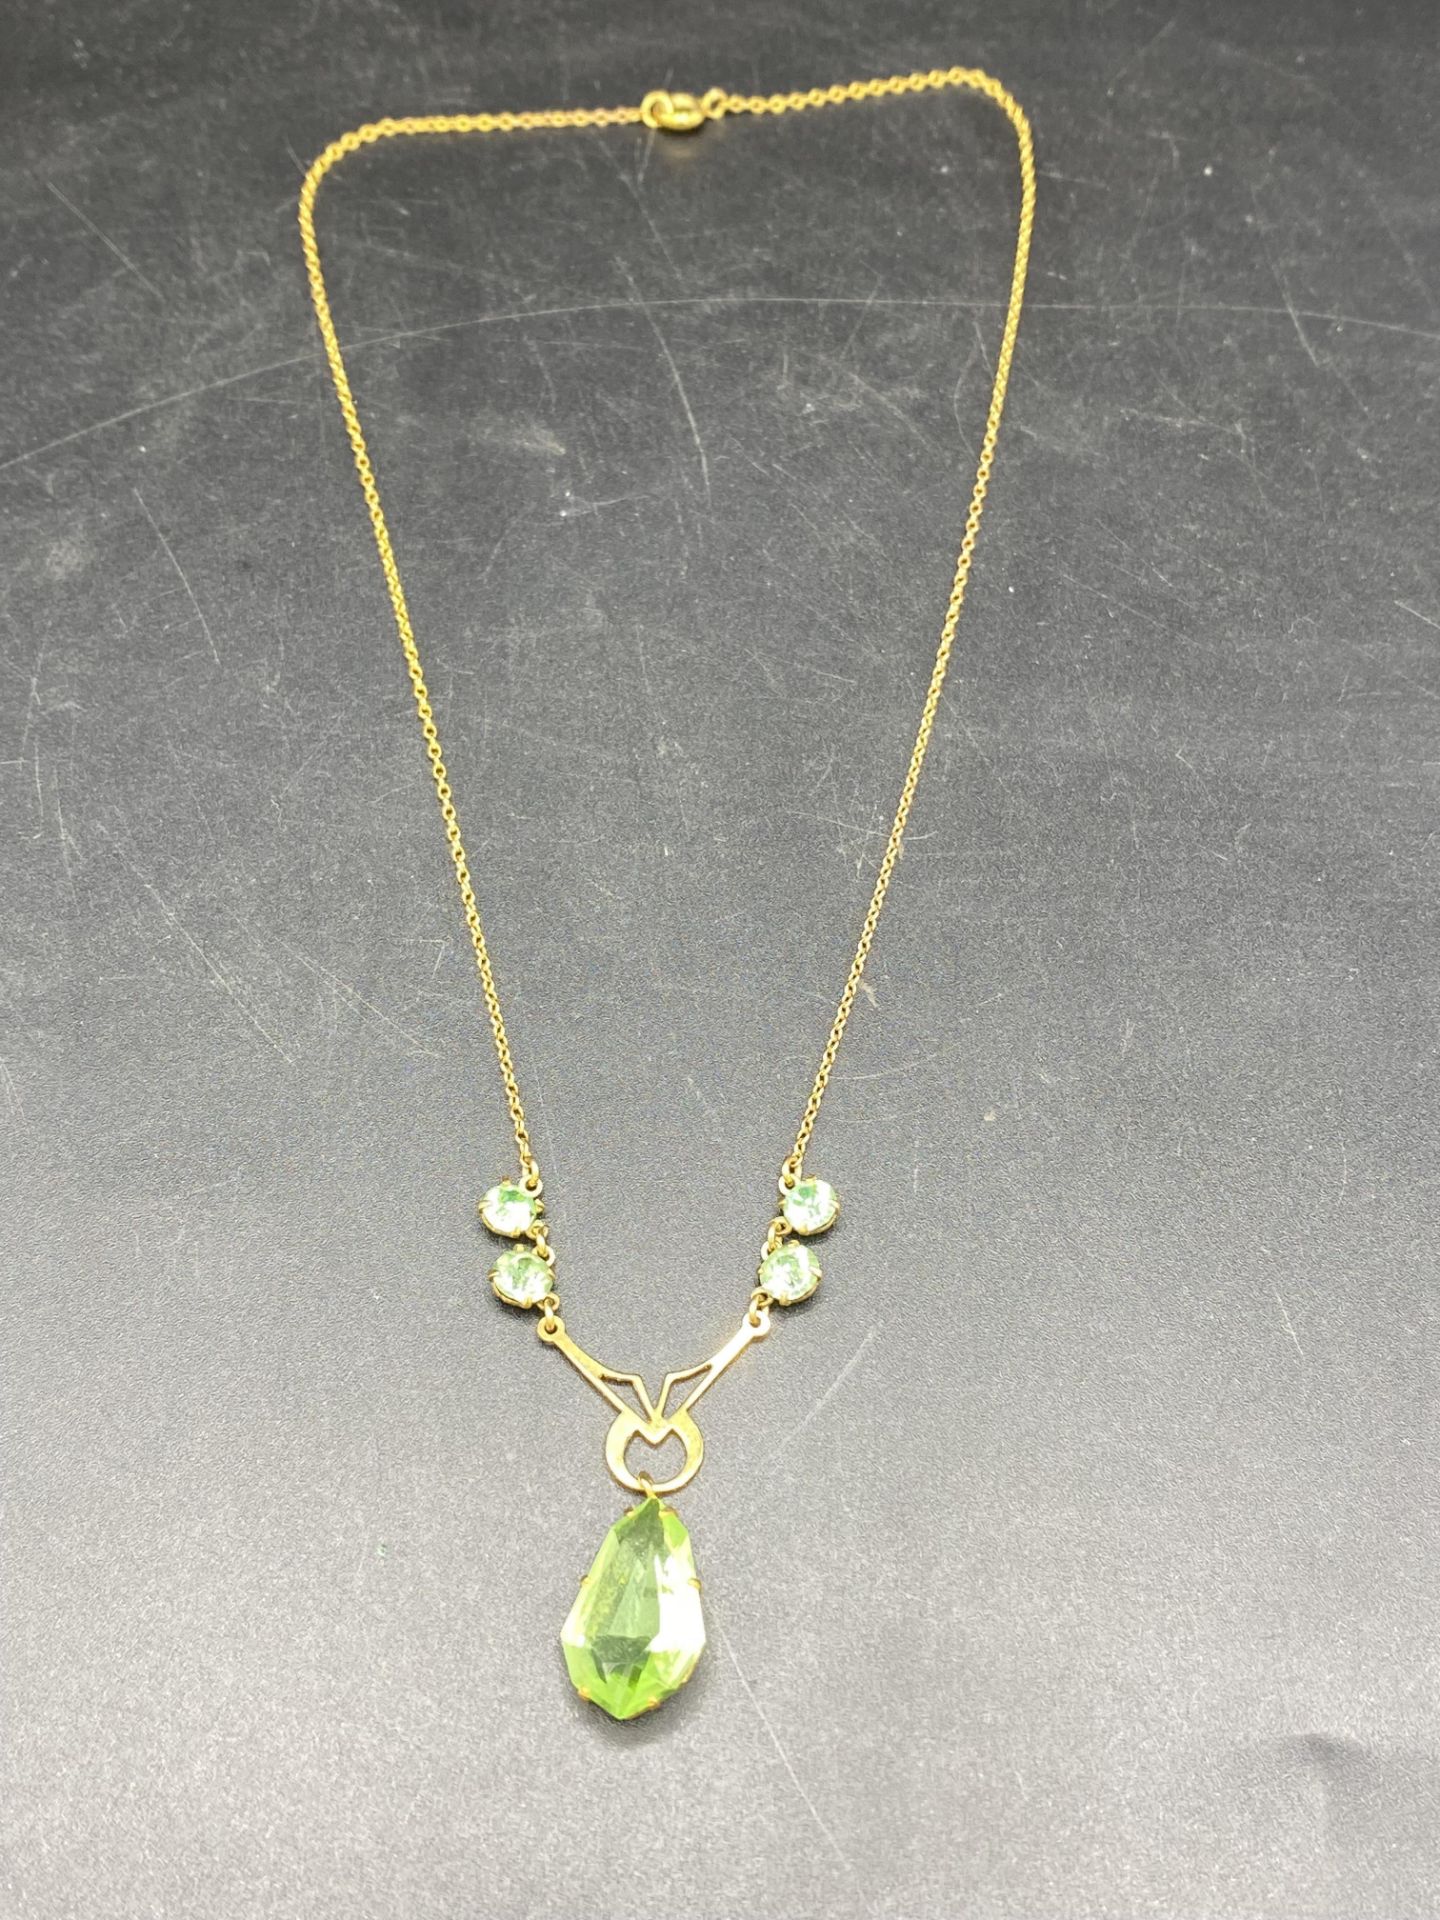 9ct gold necklace set with a pale green teardrop and a 9ct gold diamond set locket - Image 5 of 7